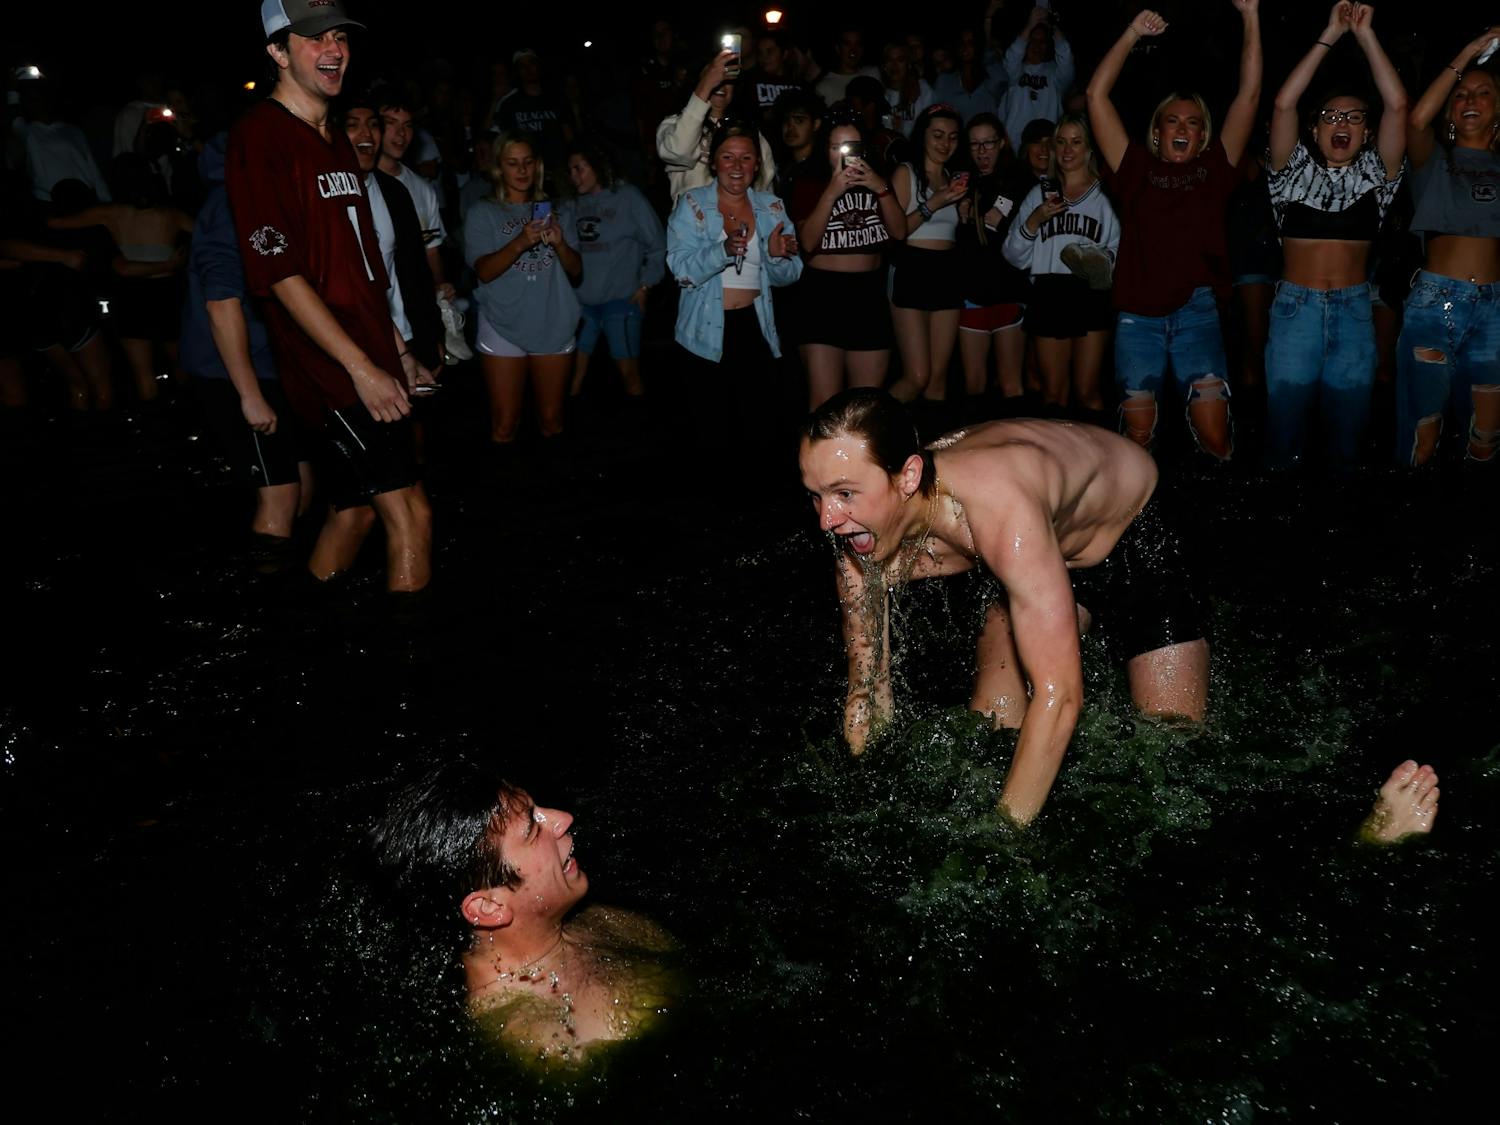 South Carolina students wrestle in the Thomas Cooper Library fountain after hundreds of students jumped in the water to celebrate the women's basketball team’s win over the University of Connecticut in the national championship.  